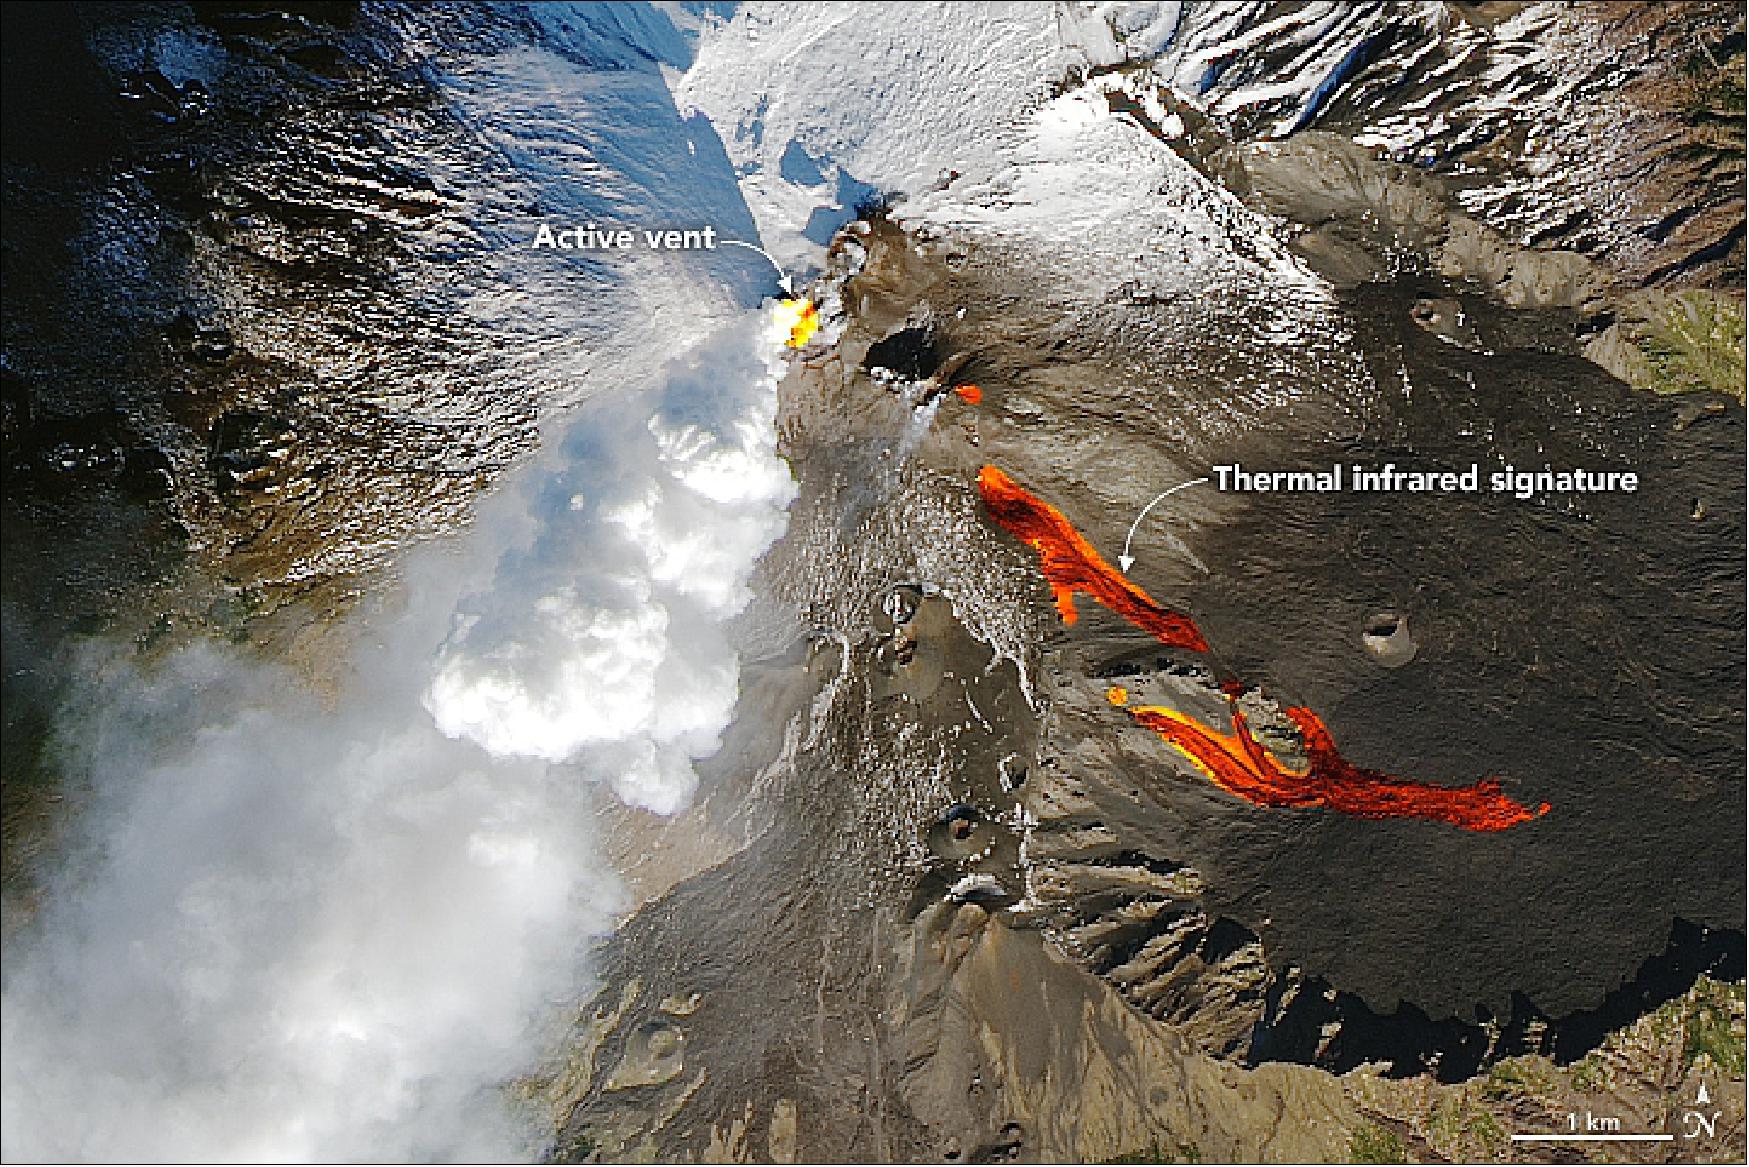 Figure 118: This image highlights the active vent and thermal infrared signature from lava flows, which can be seen near the newly formed fissure on the southeastern side of the volcano. The image was created with data from OLI (bands 4-3-2) and TIRS (Thermal Infrared Sensor) on Landsat-8 (image credit: NASA Earth Observatory, image by Joshua Stevens, using Landsat data from the U.S. Geological Survey. Text by Kasha Patel)